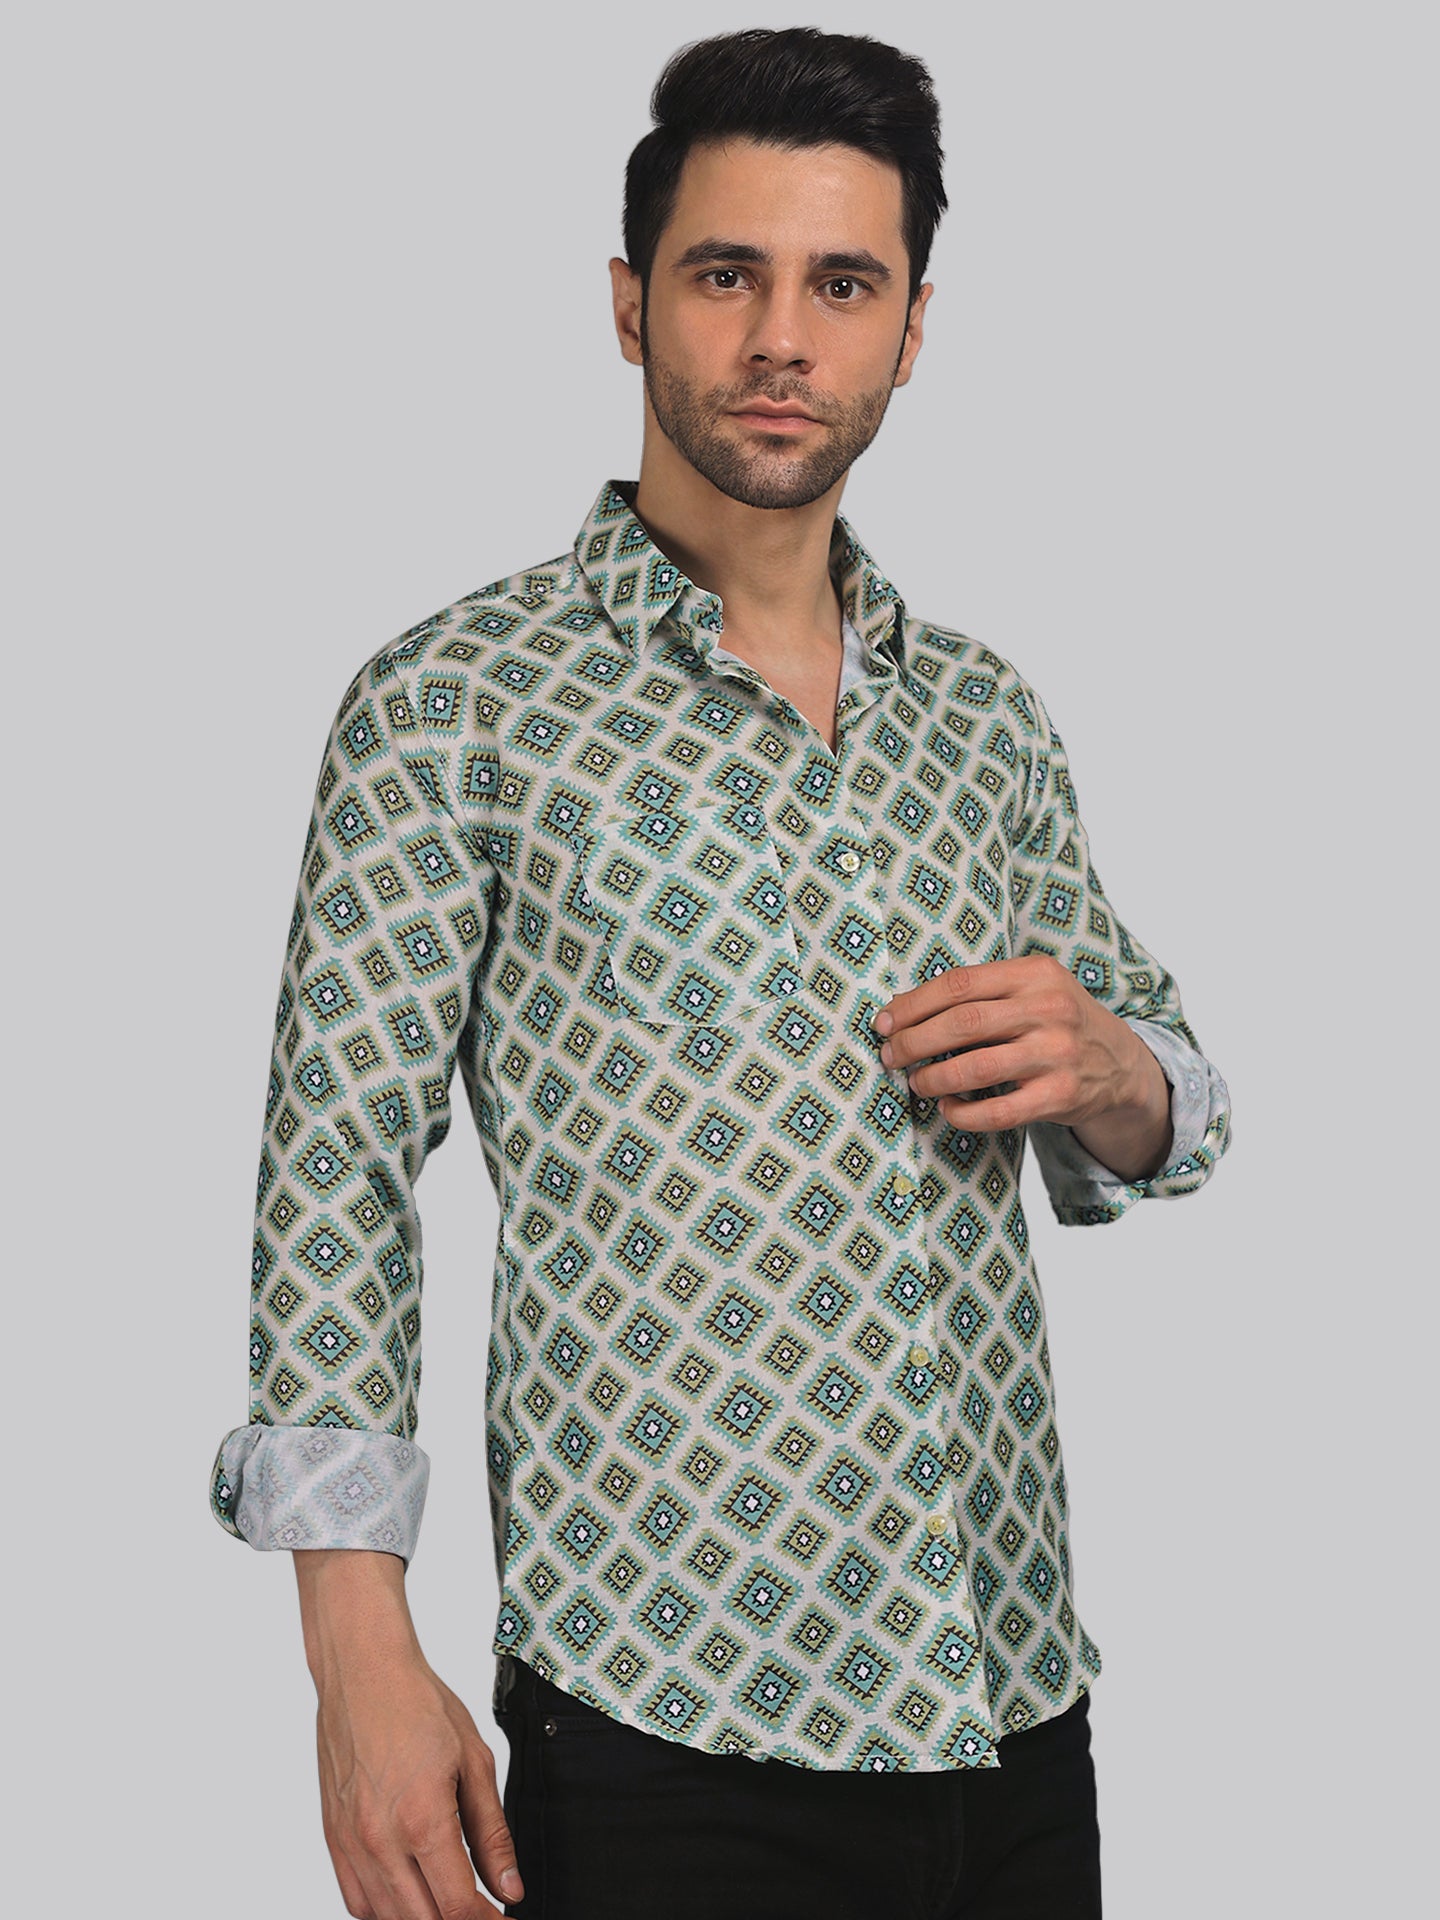 Are Oxford cotton shirts suitable for formal occasions?